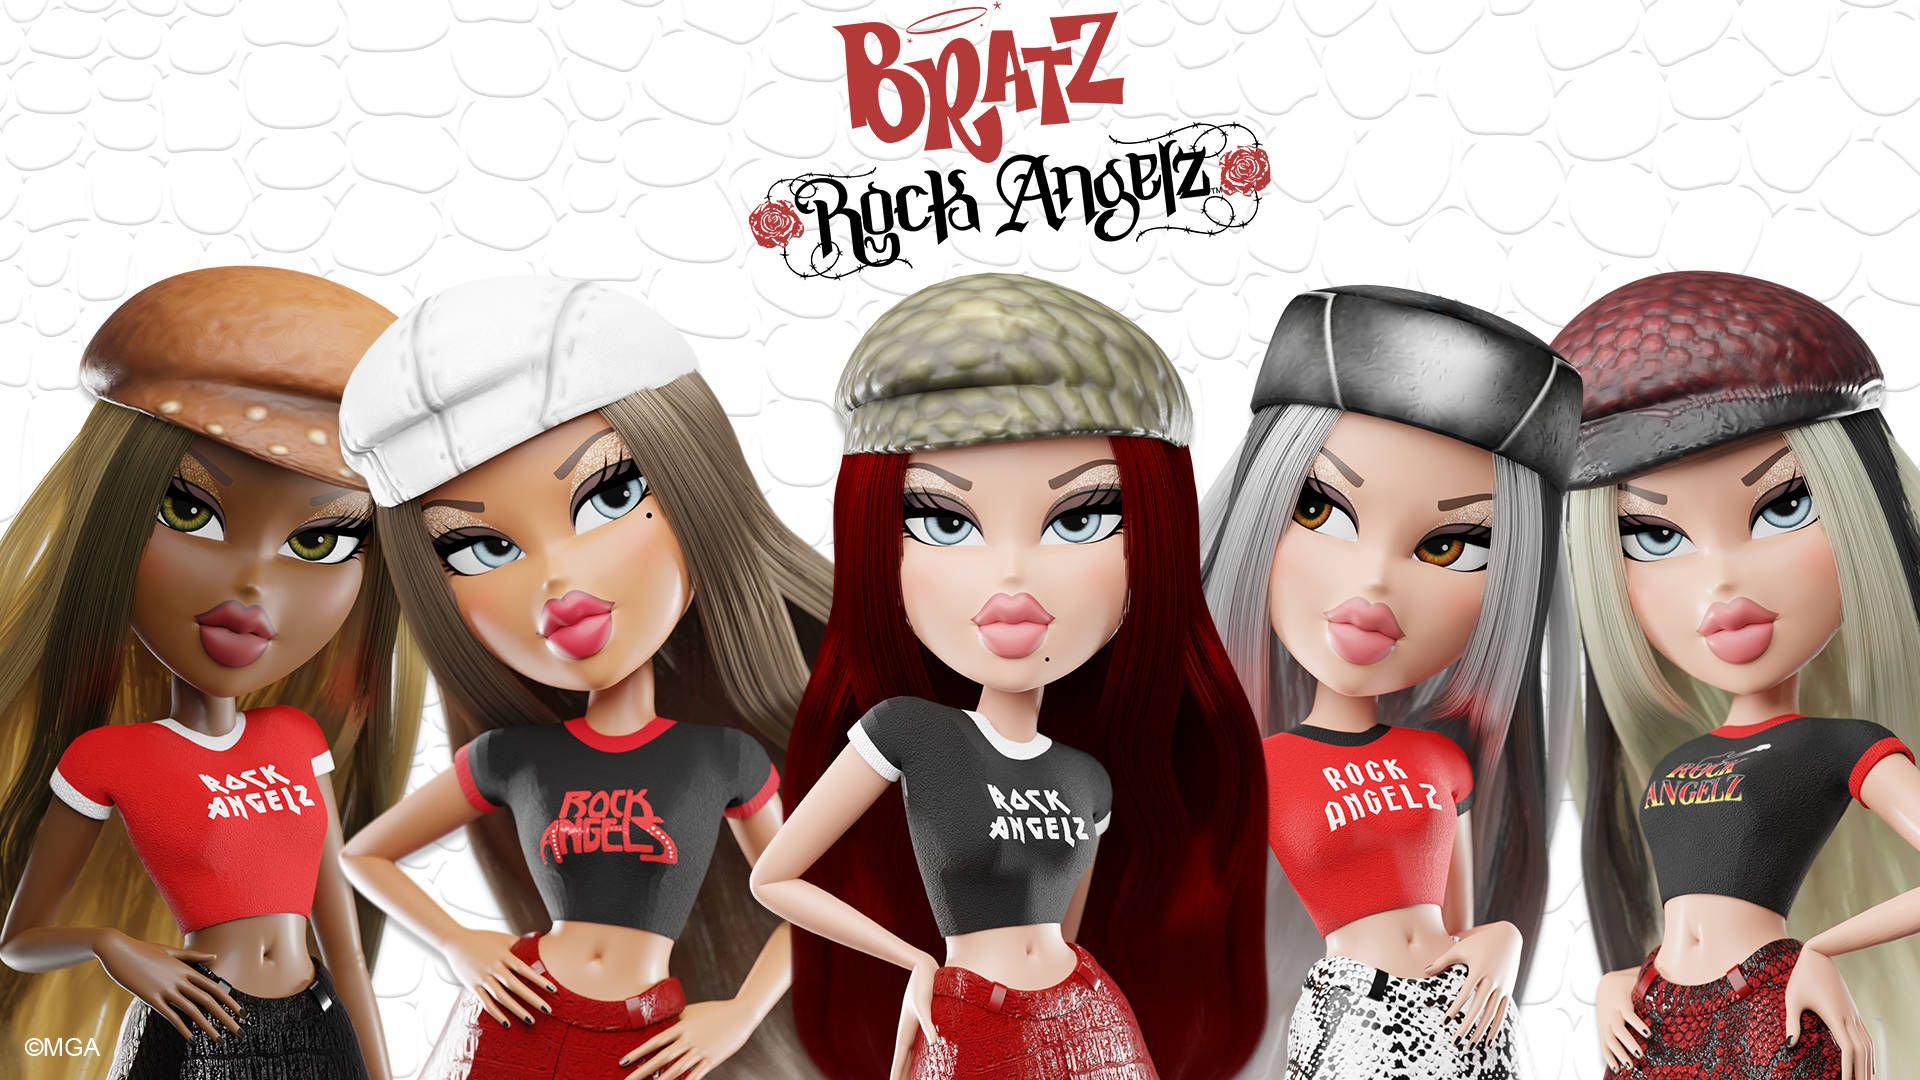 A group of four dolls with different hairstyles - Bratz